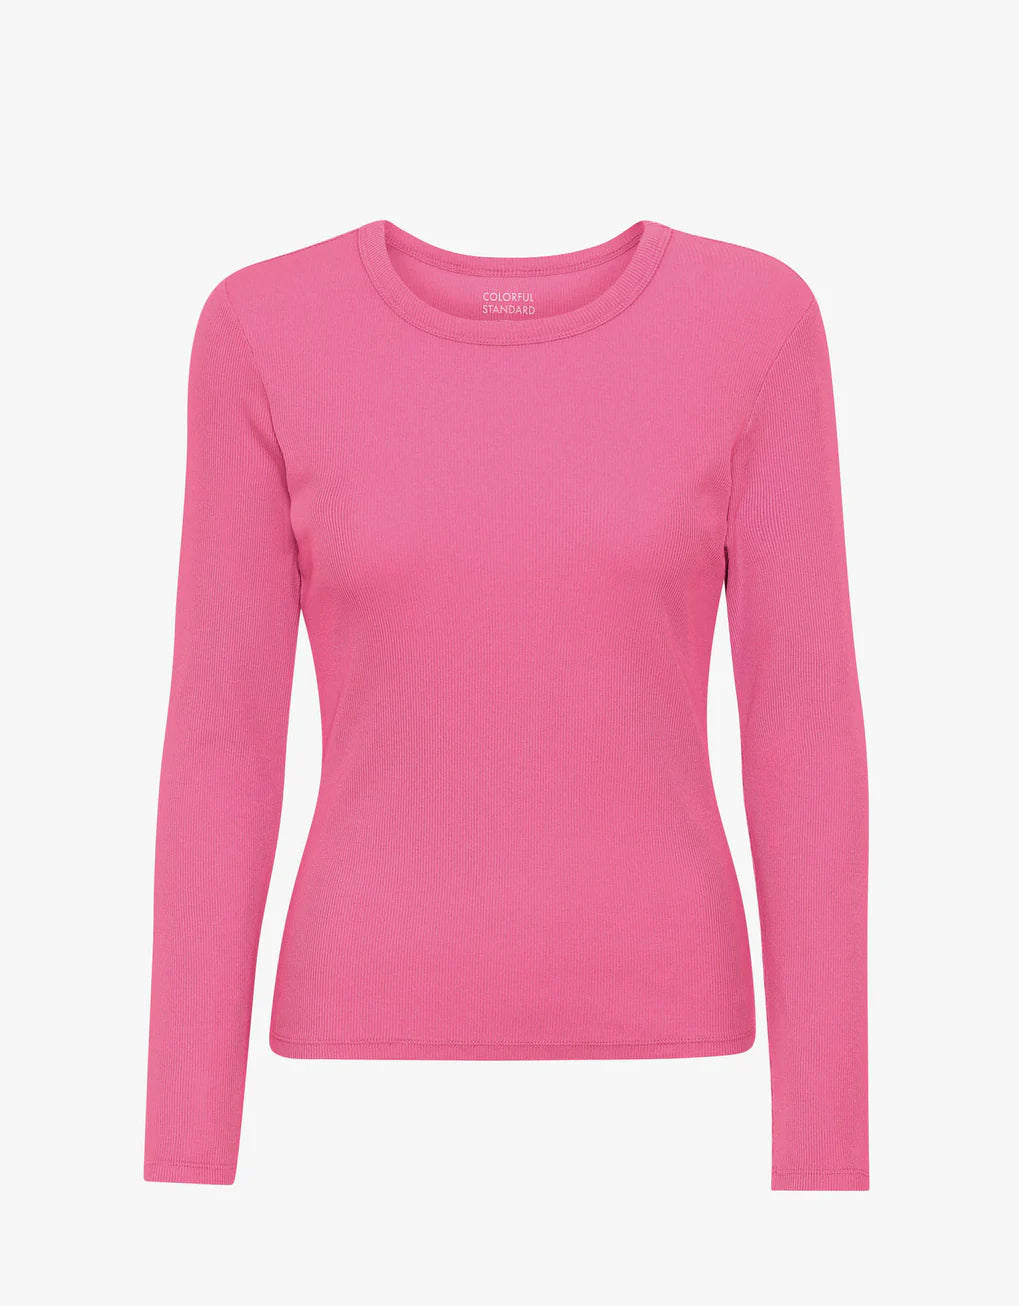 A Colorful Standard women's pink long-sleeved Organic Rib LS T-Shirt made from organic cotton with a hint of elastane for stretchiness.